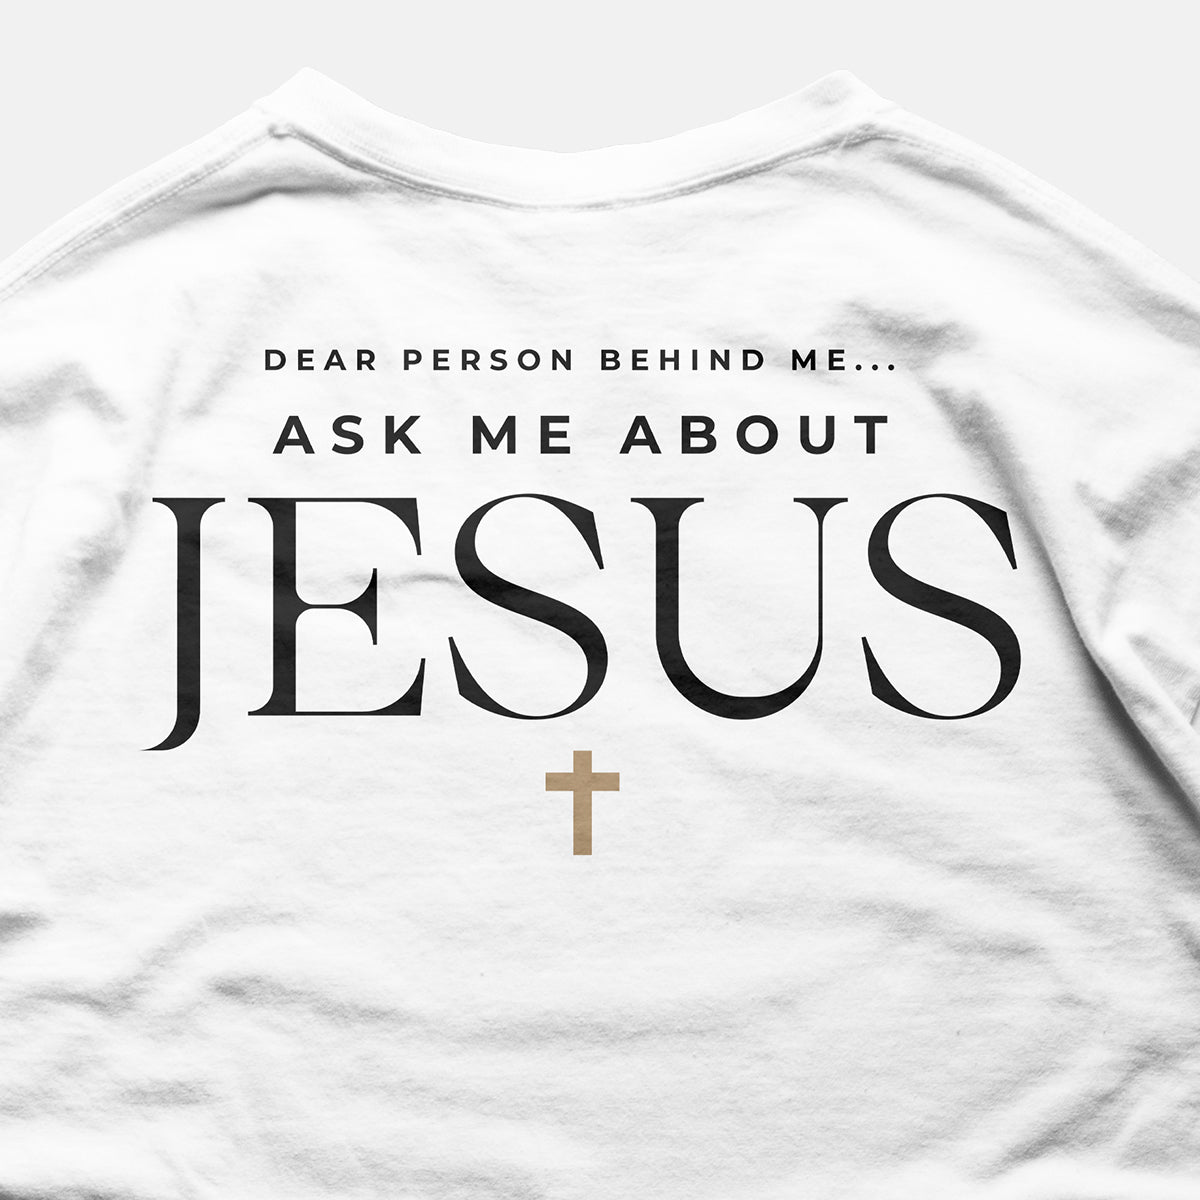 Full Send 'Ask Me About Jesus' Lightweight T-Shirt